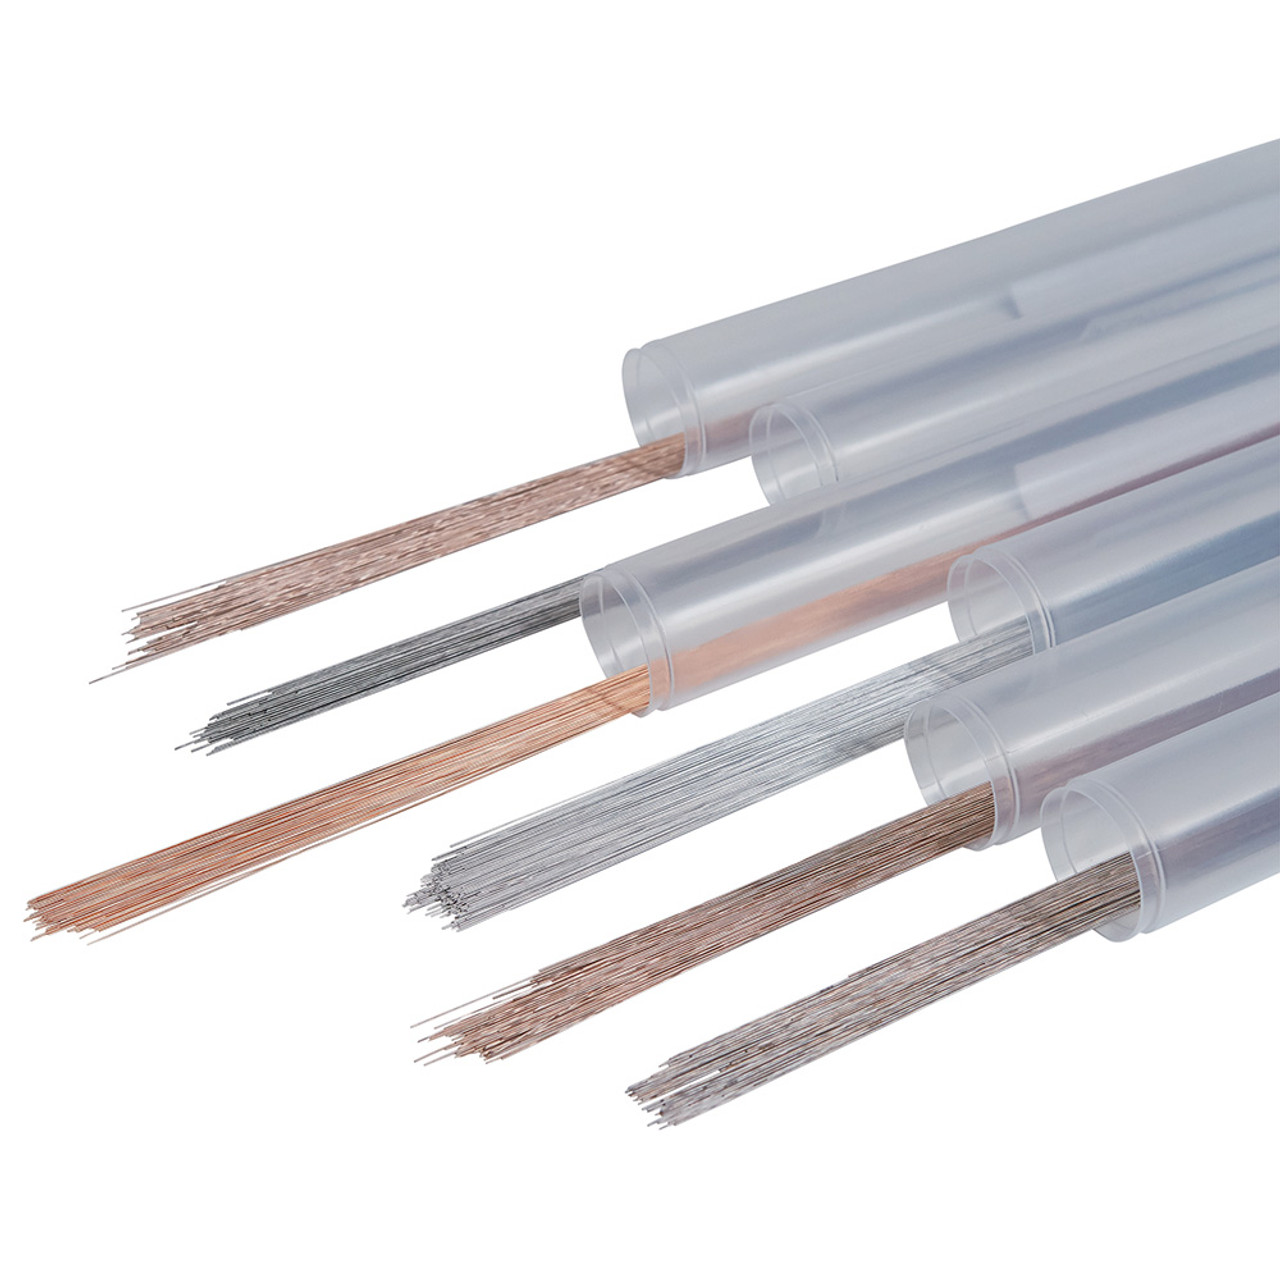 Laser Welding Wires - A-2, 0.8mm pkg. of 25 grams = approx. 21 wires